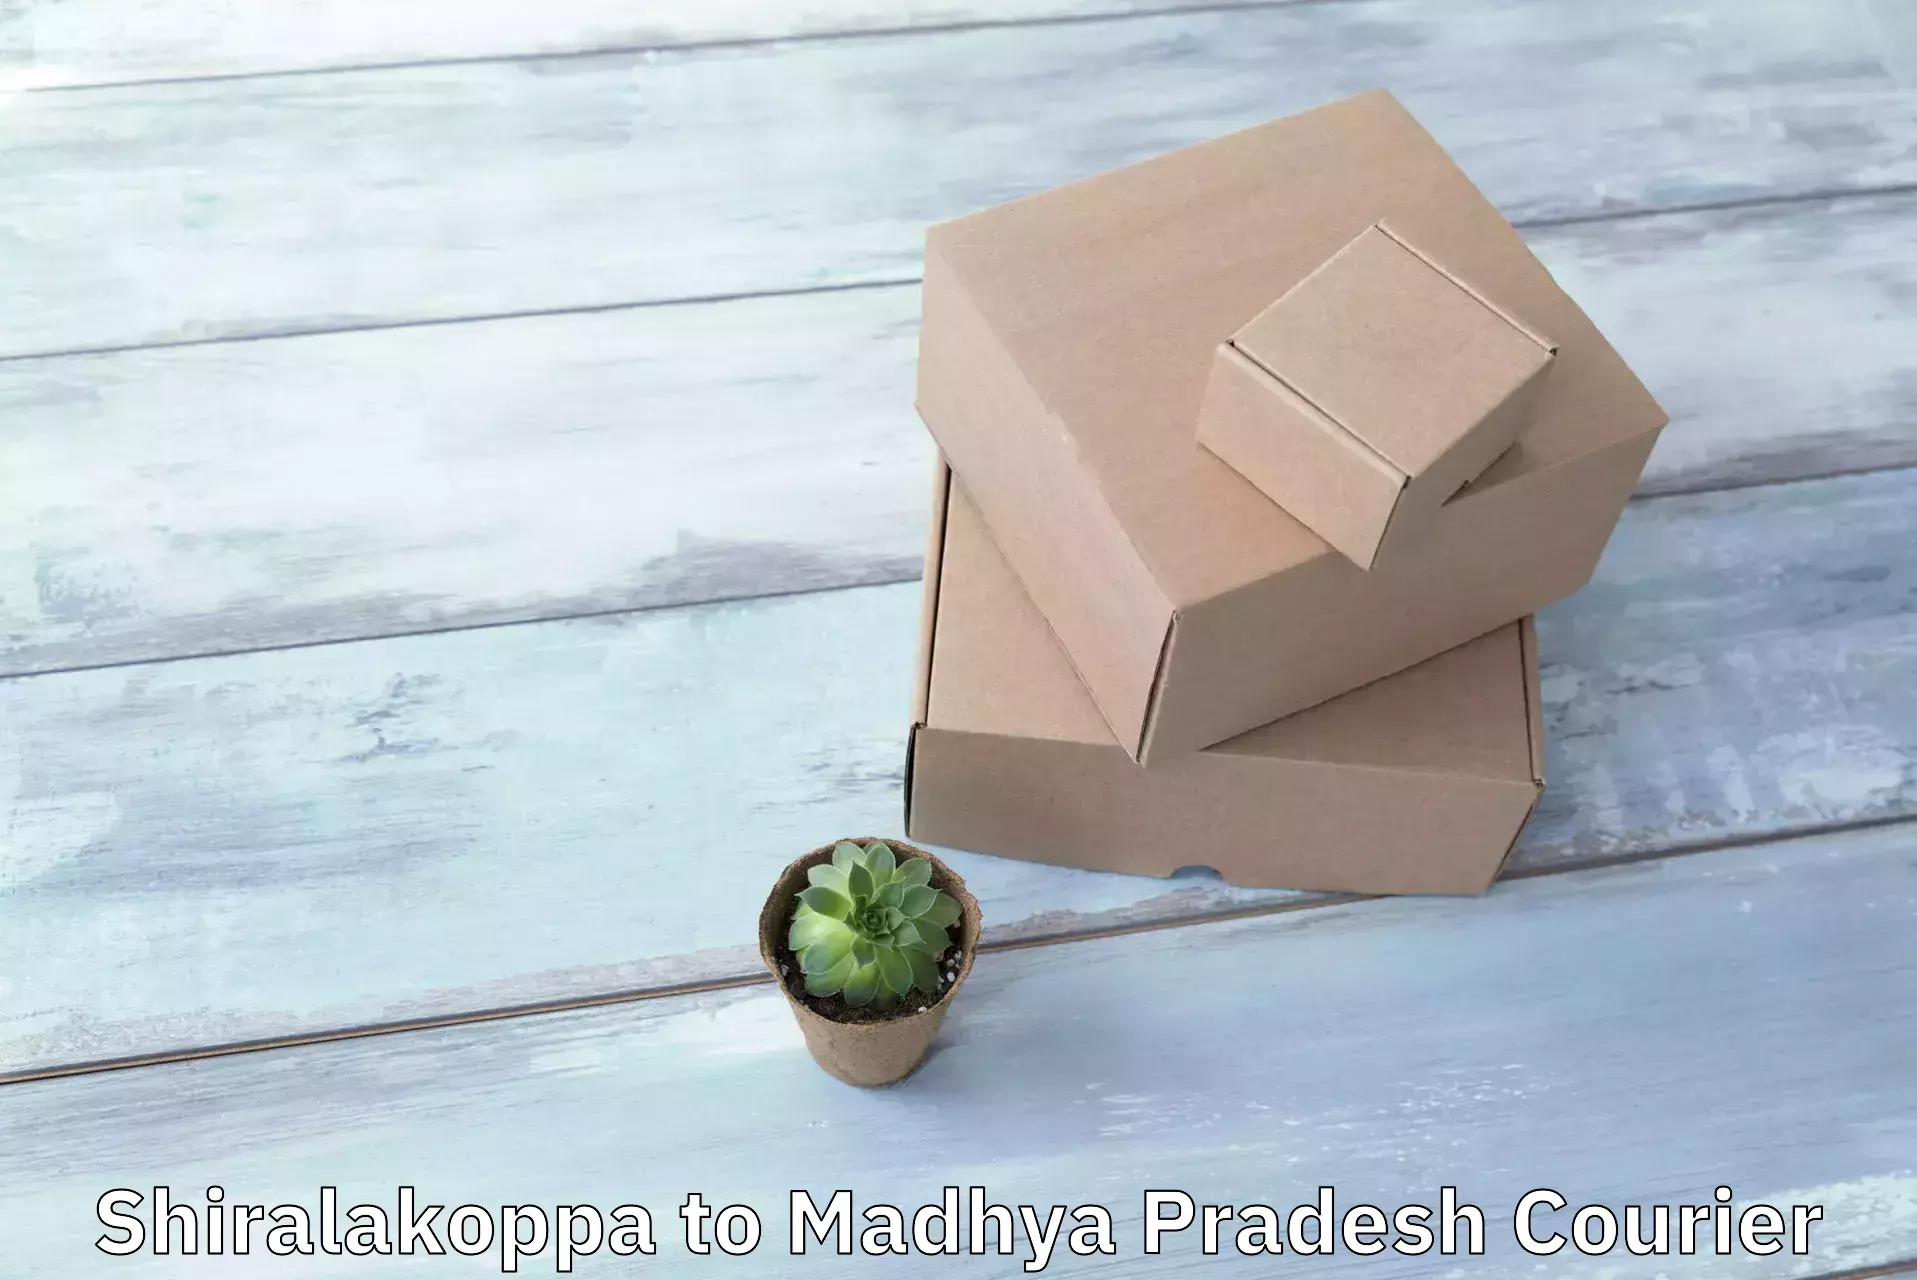 Reliable parcel services Shiralakoppa to Gwalior